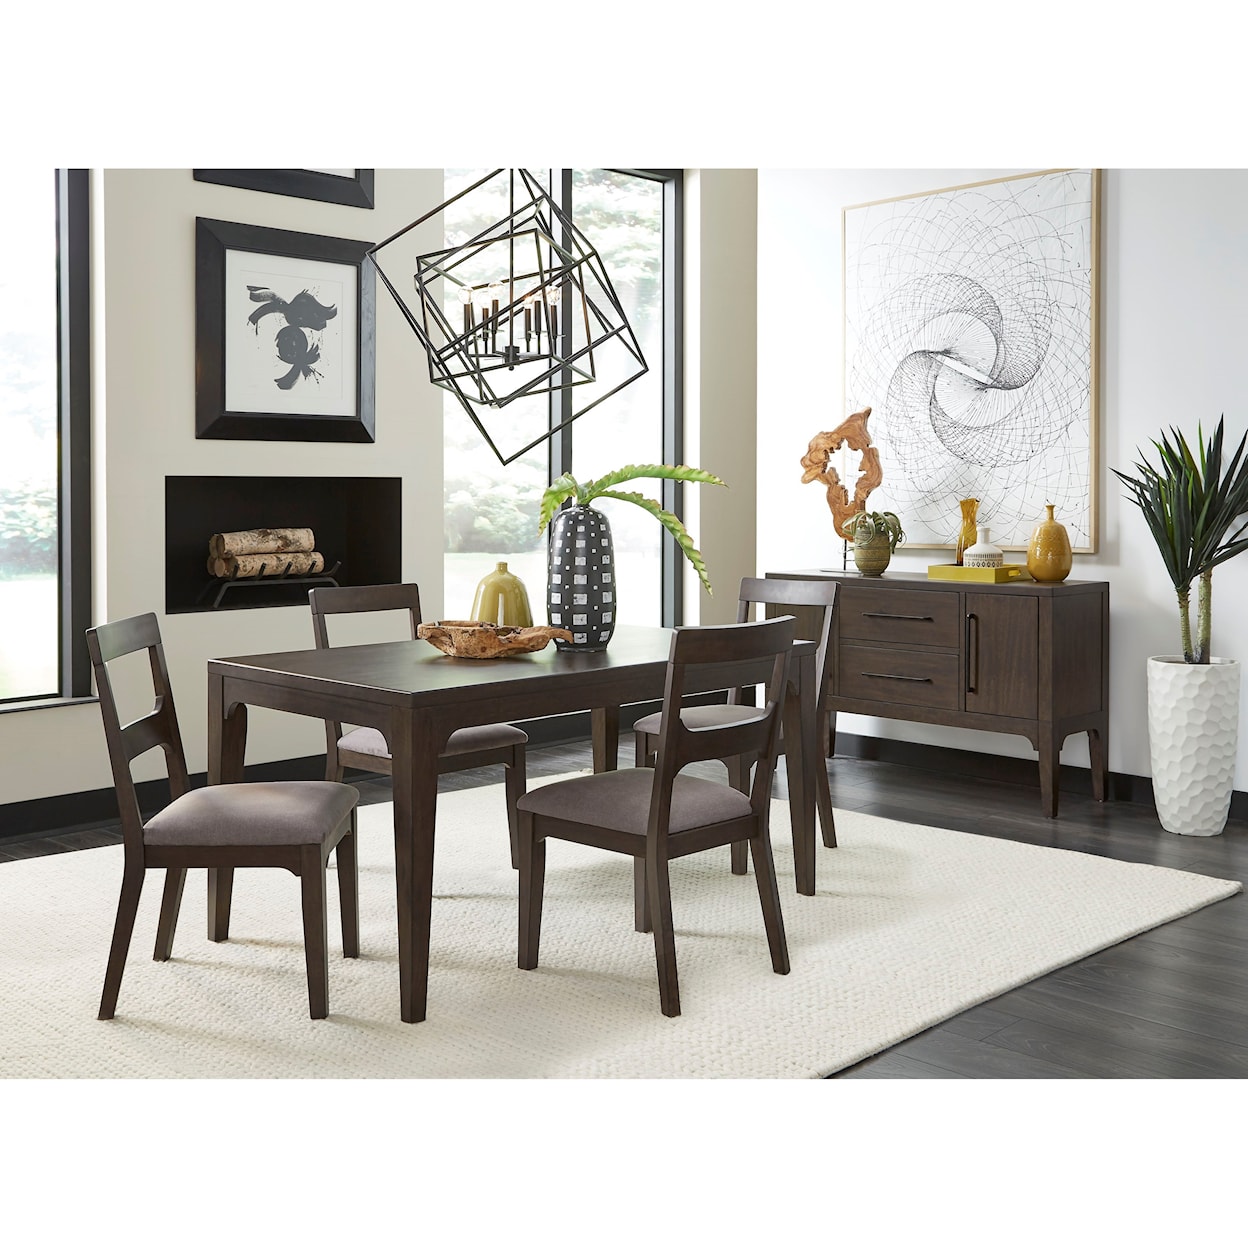 Modus International Bryce Casual Dining Room Group